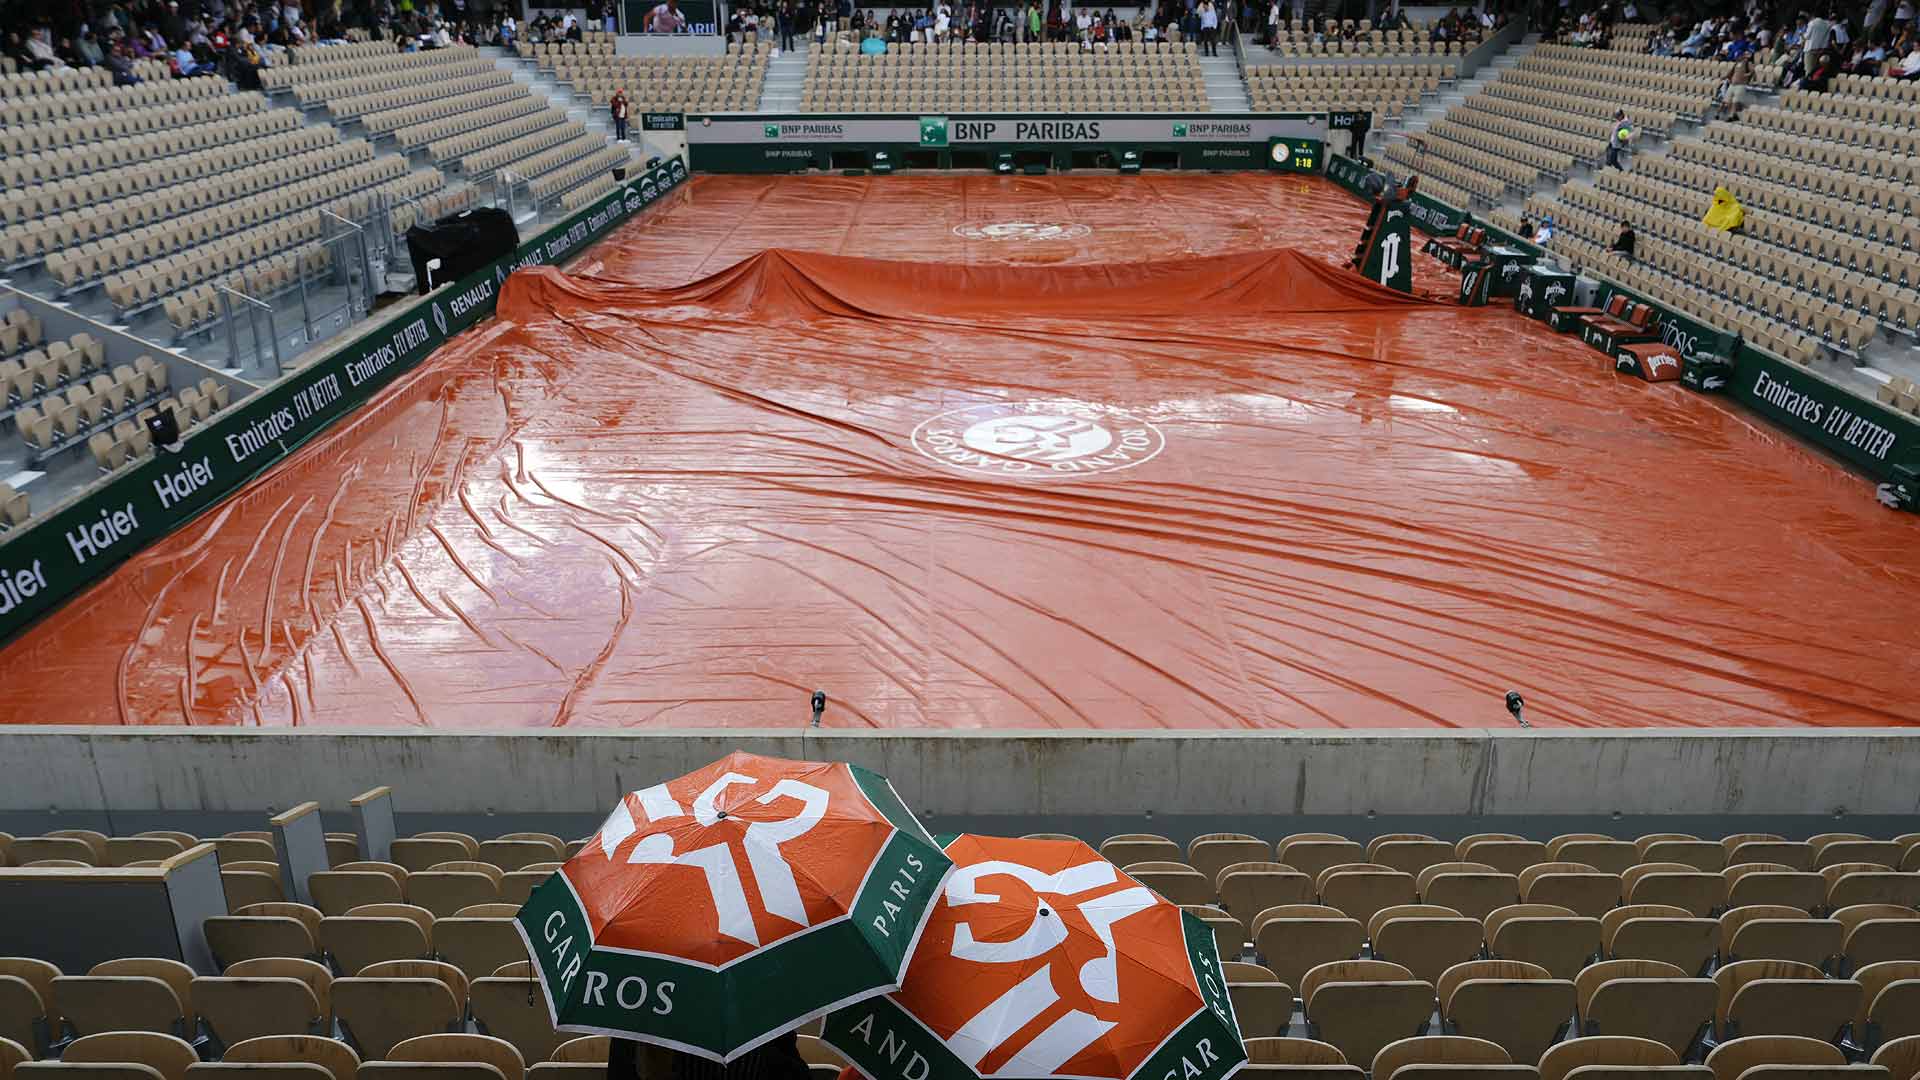 Play has been suspended on uncovered courts at Roland Garros due to rain.